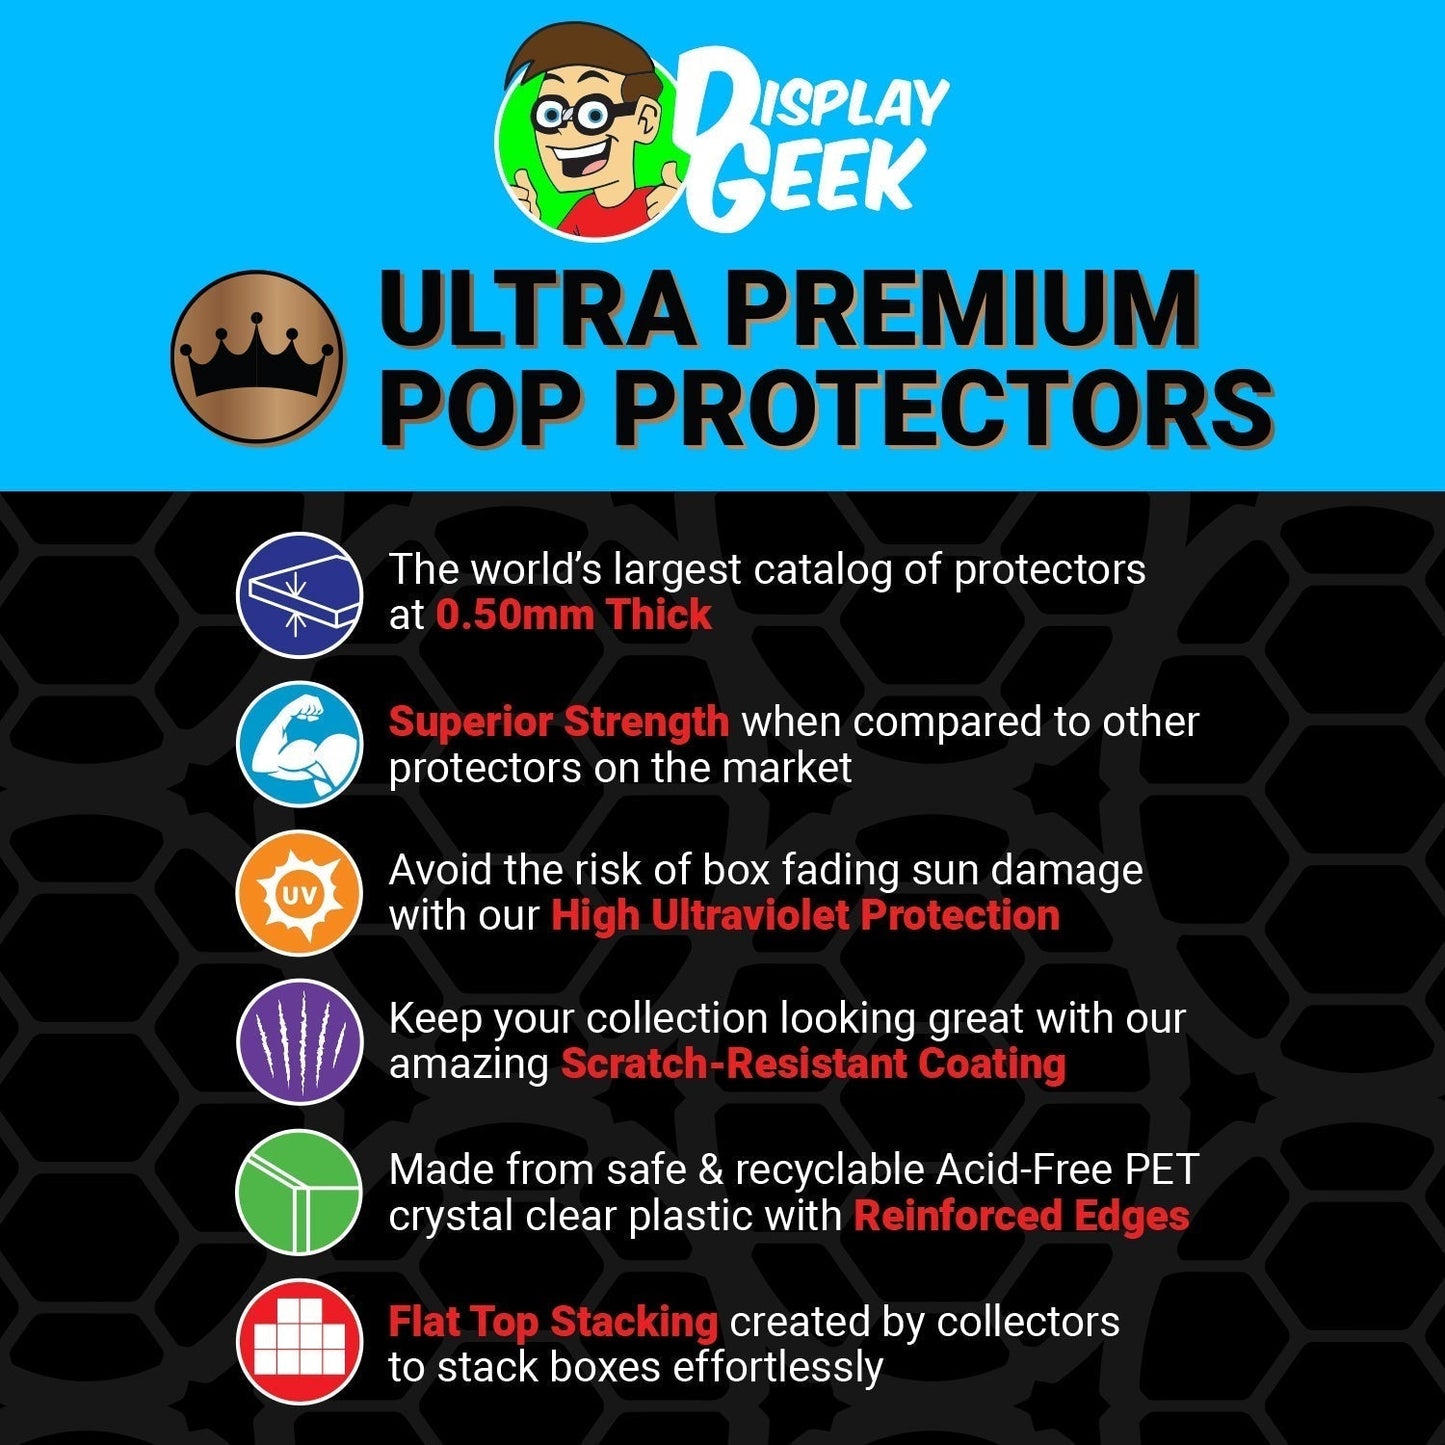 Pop Protector for 2 Pack Batman & Aquaman Funko Pop - PPG Pop Protector Guide Search Created by Display Geek